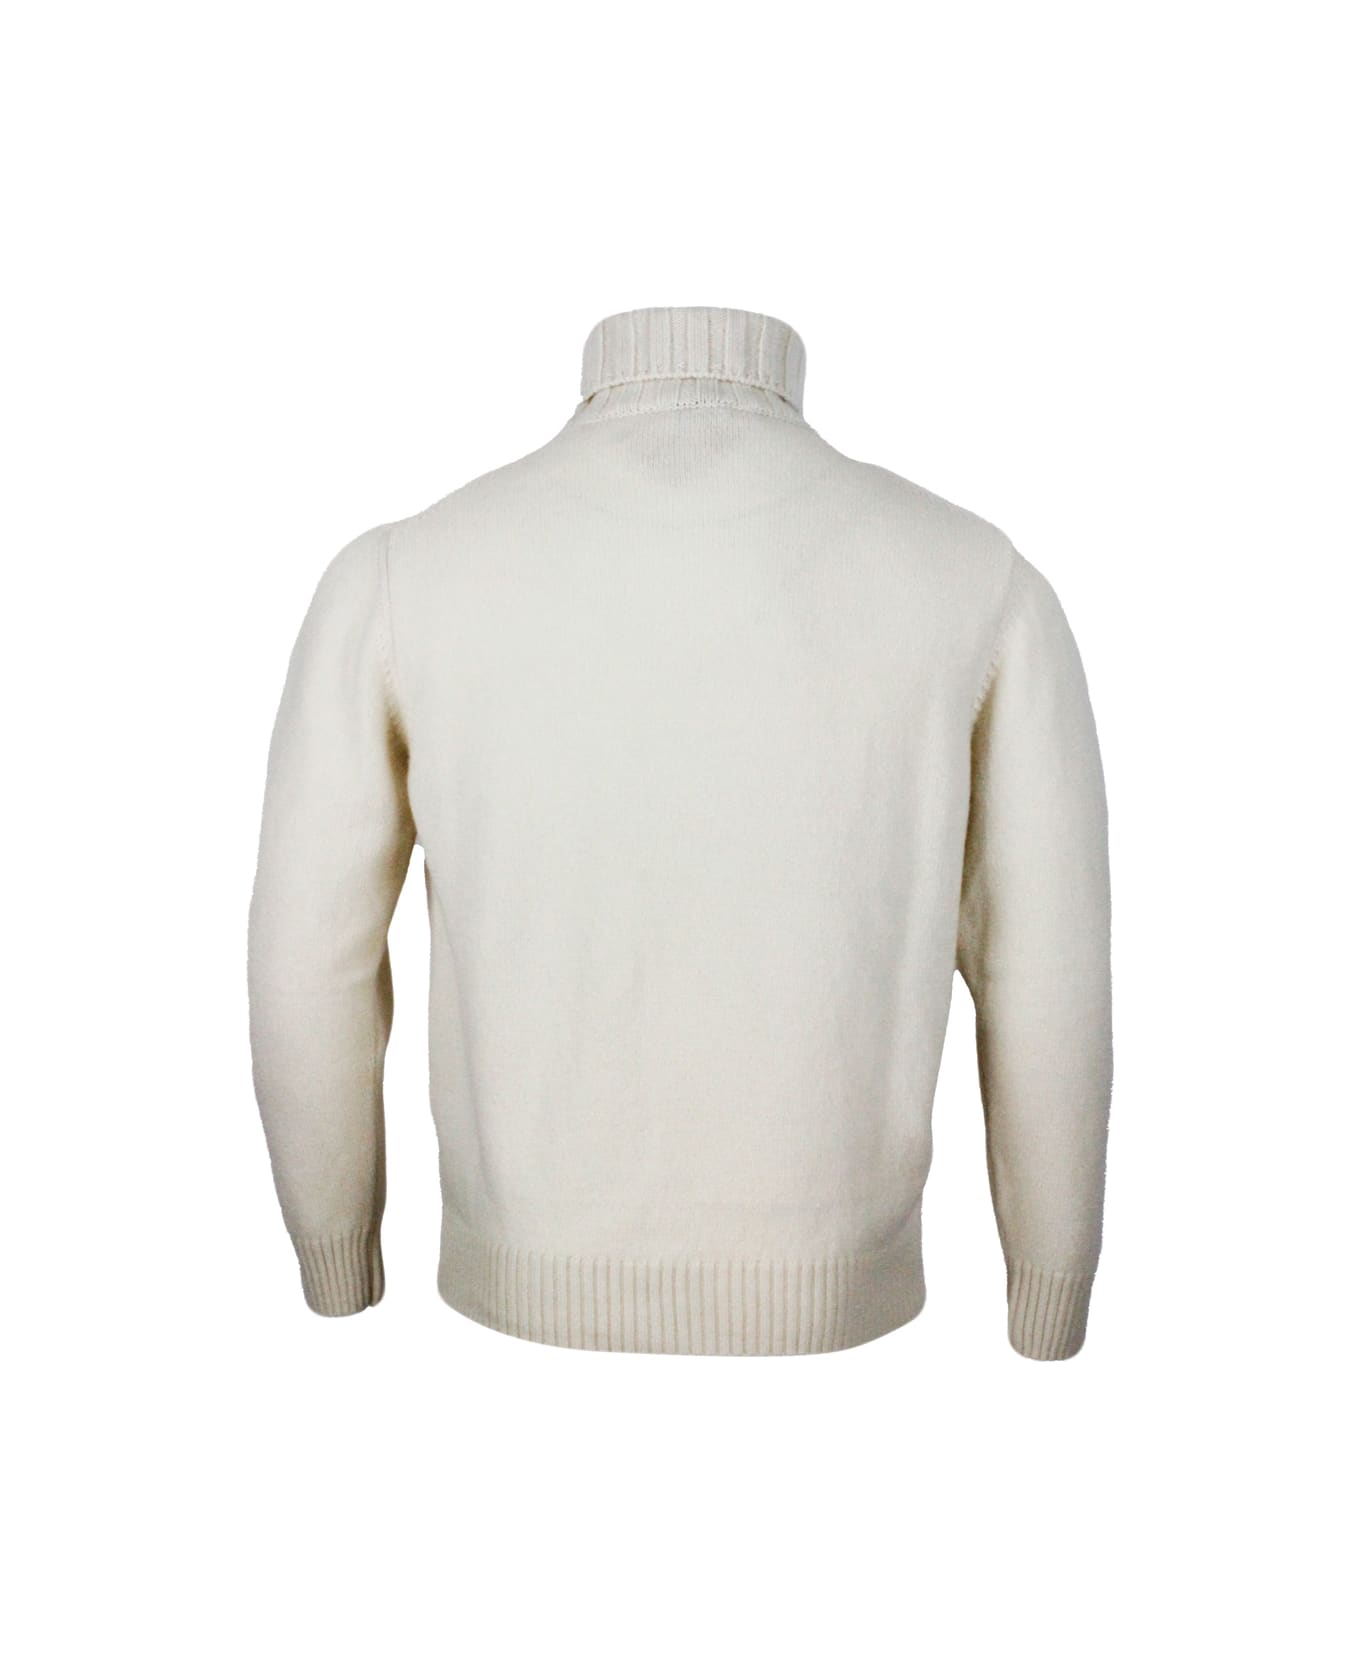 Sonrisa Turtleneck Sweater In Fine And Very Soft Cashmere Fleece With Flat Rib Knit On The Neck - Cream